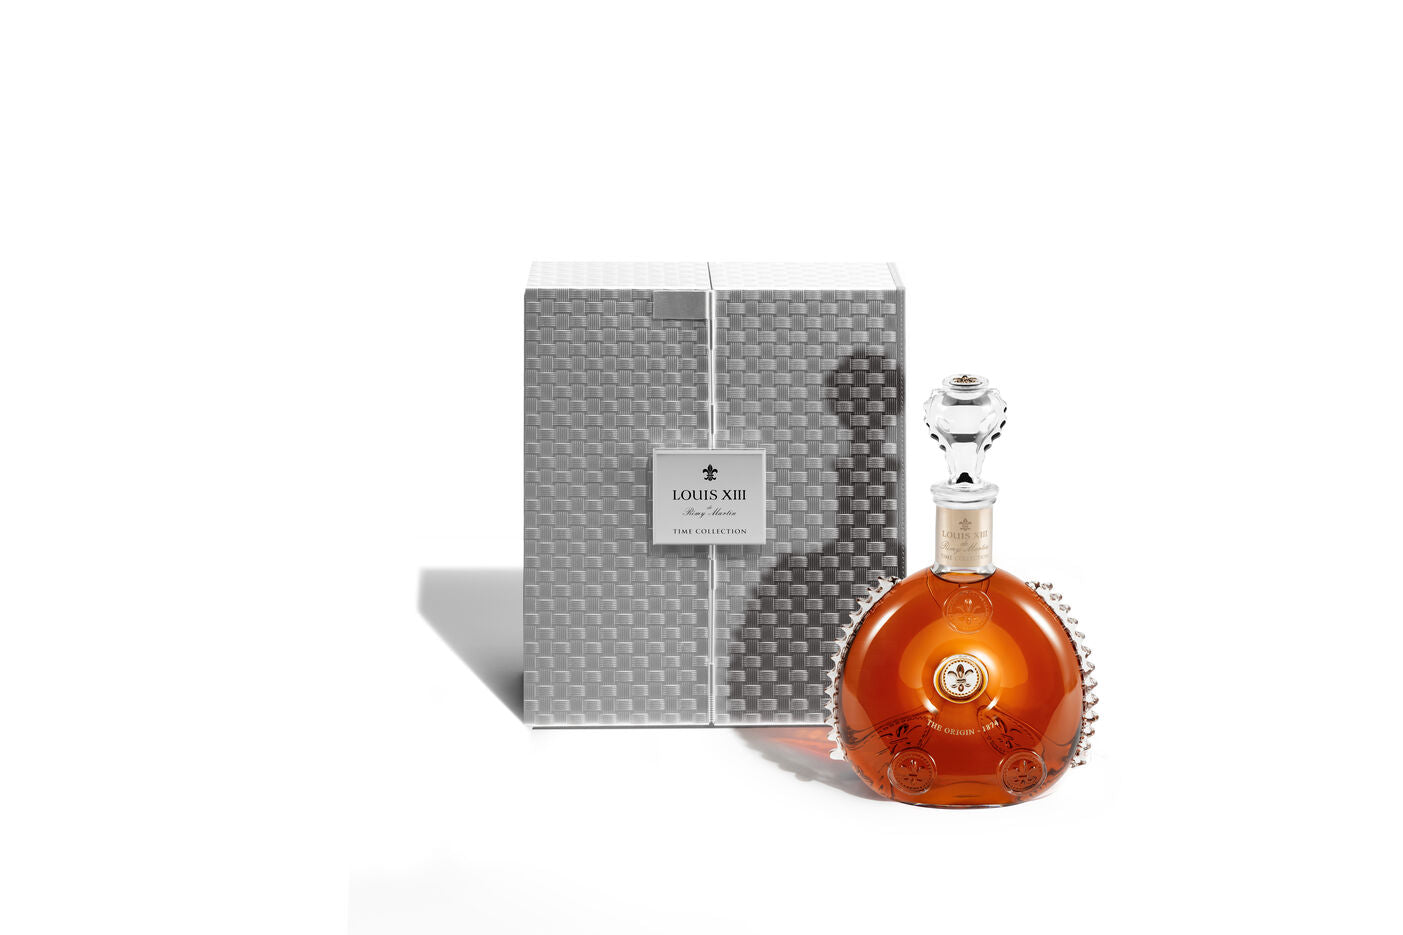 LOUIS XIII GLASSES ( Coffret Pillet V3) LXIII Crystal Glass by